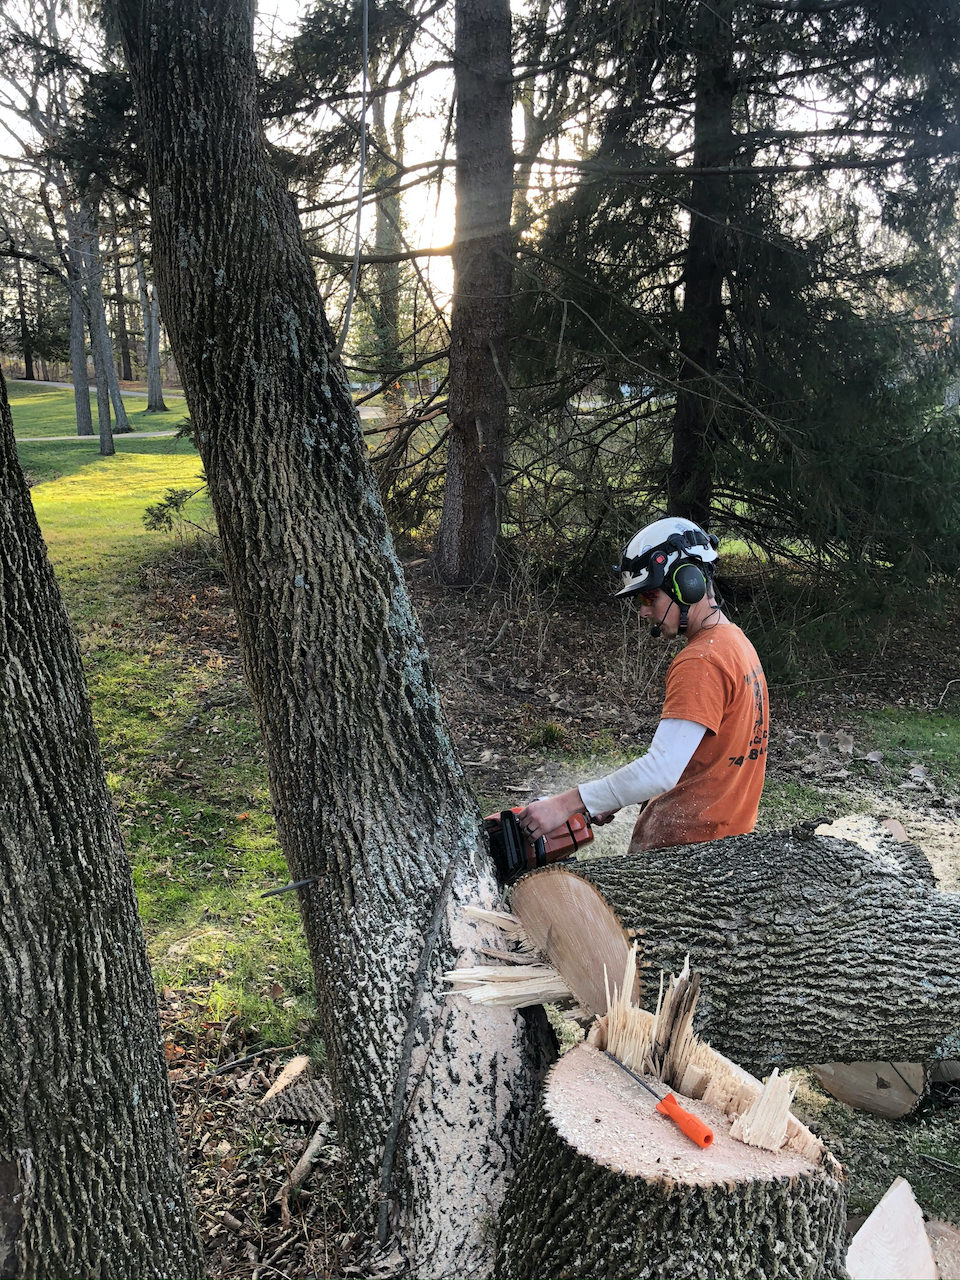 Cutting chainsaw trunk of tree